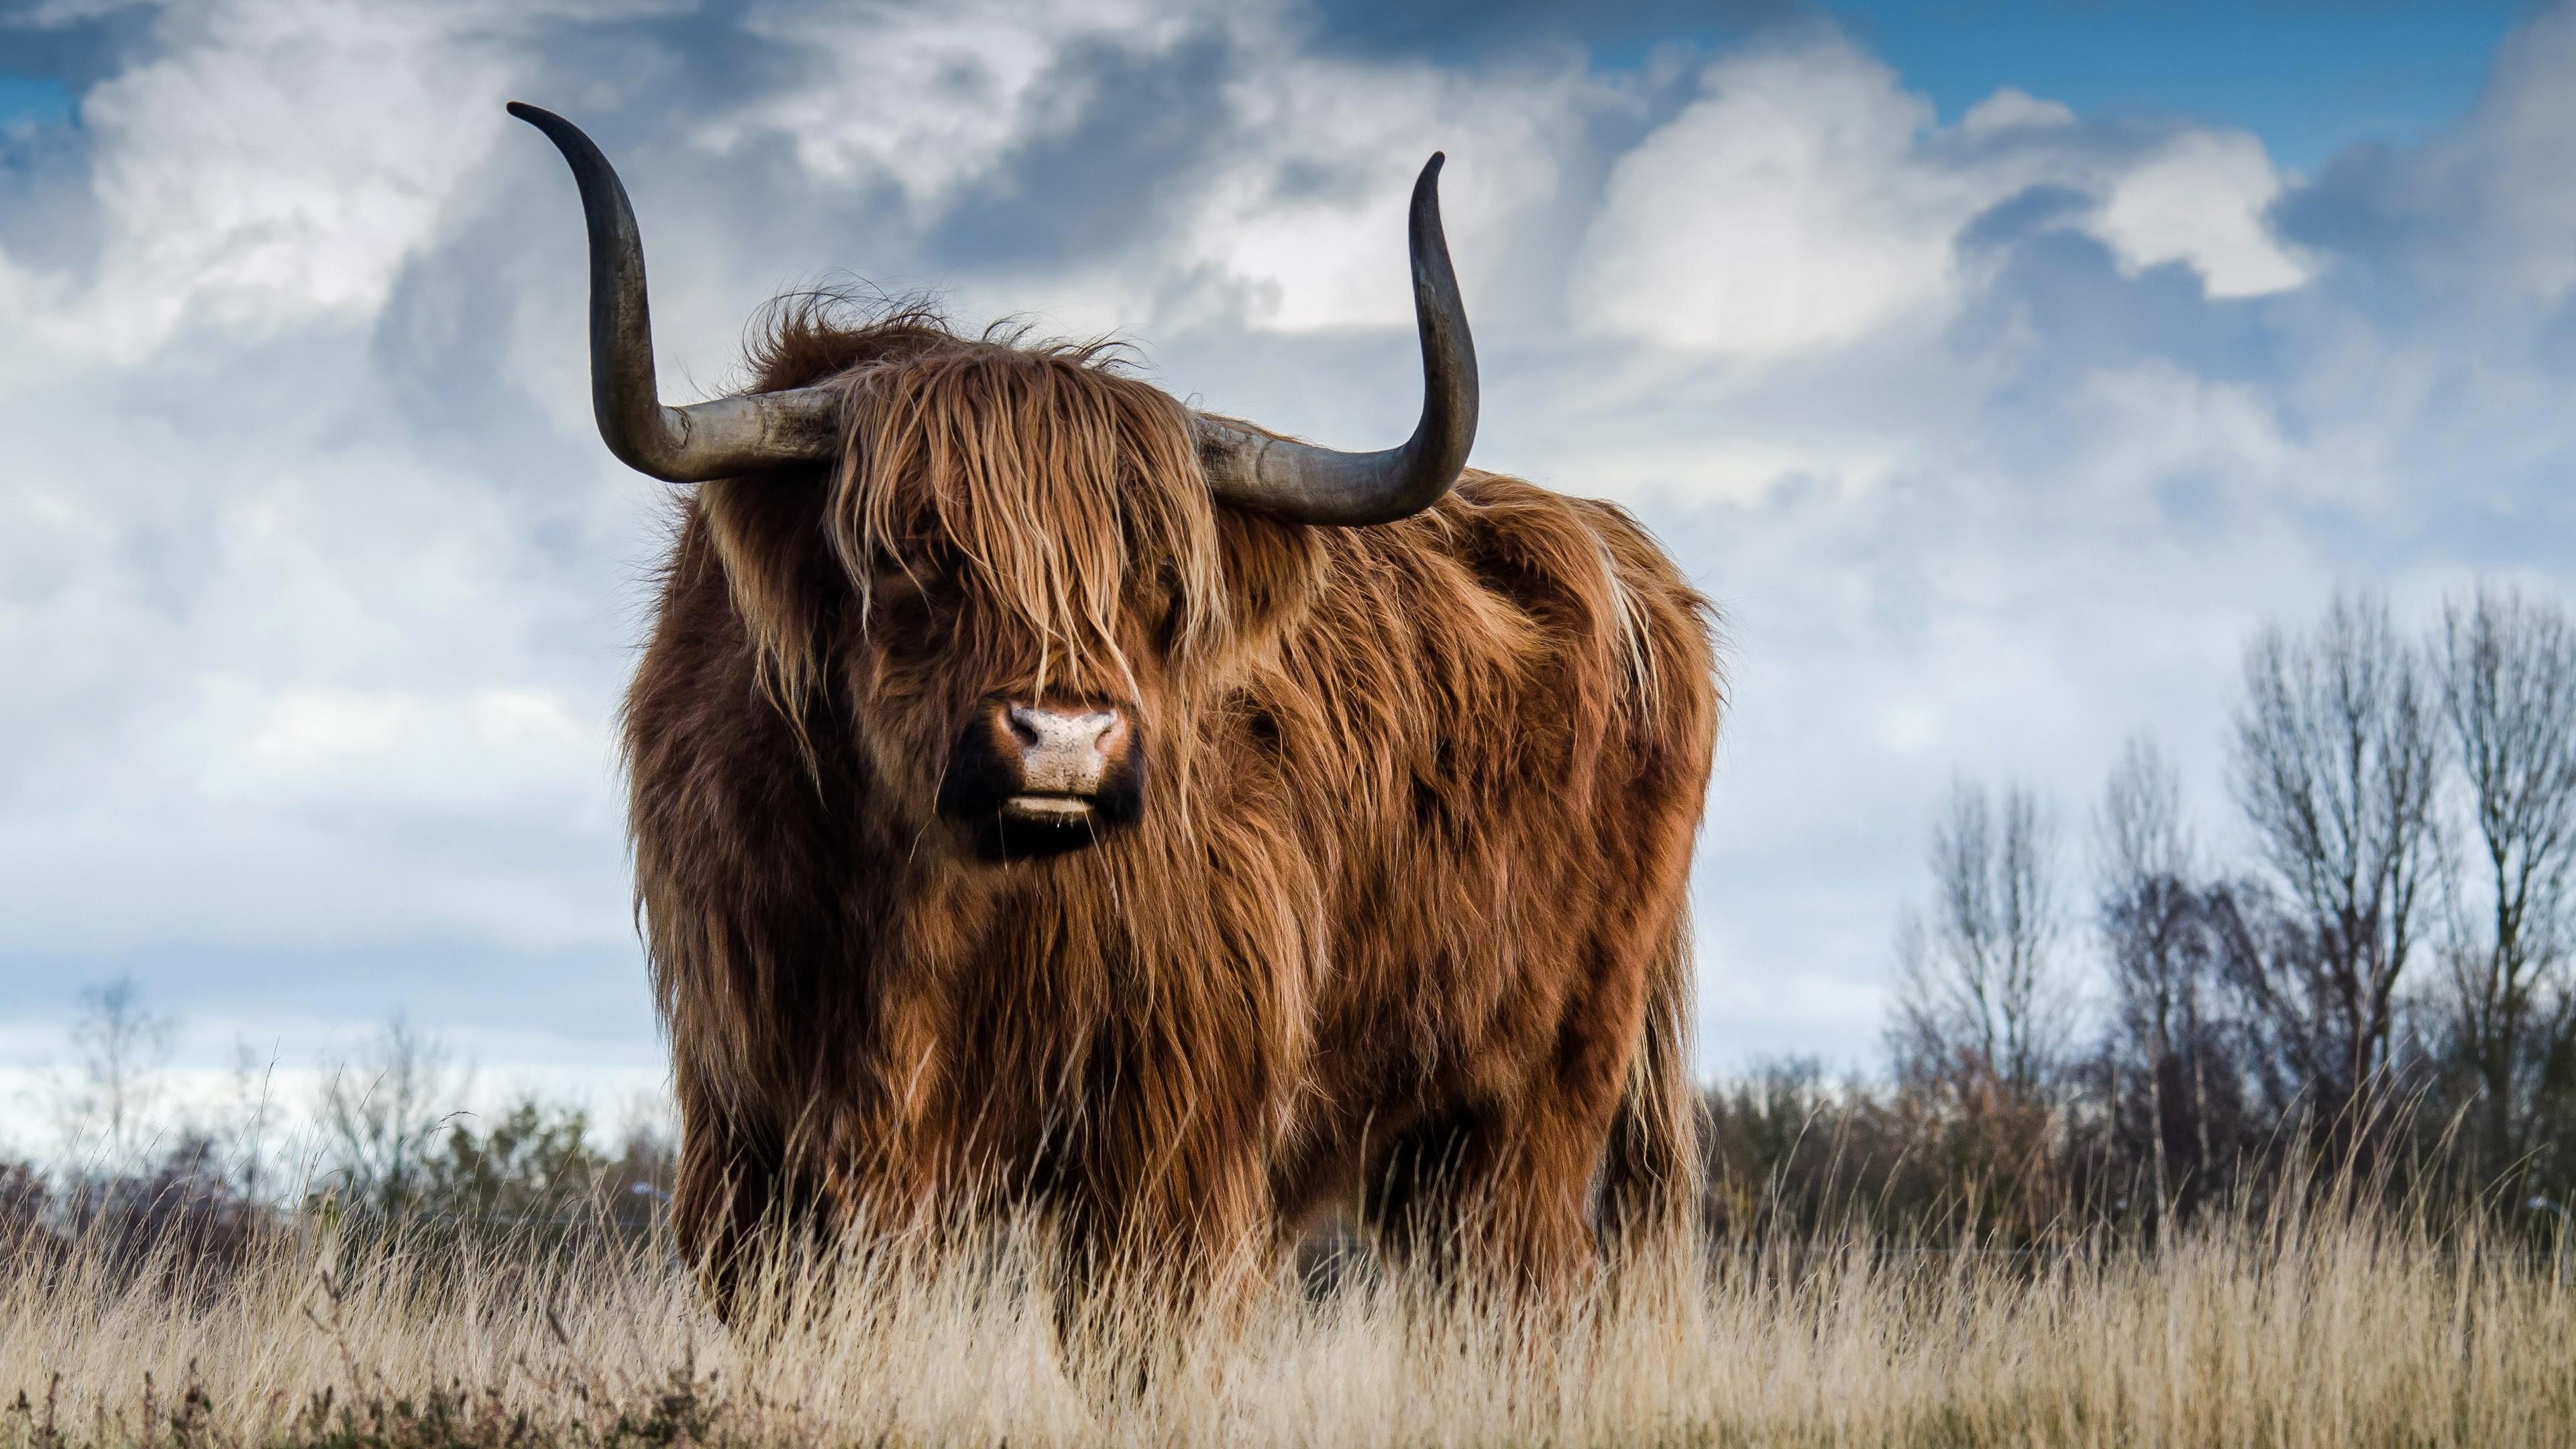 Funny Scottish Quotes With A Highland Cow Best Scottish Highland Cattle Wallpaper Studio 10